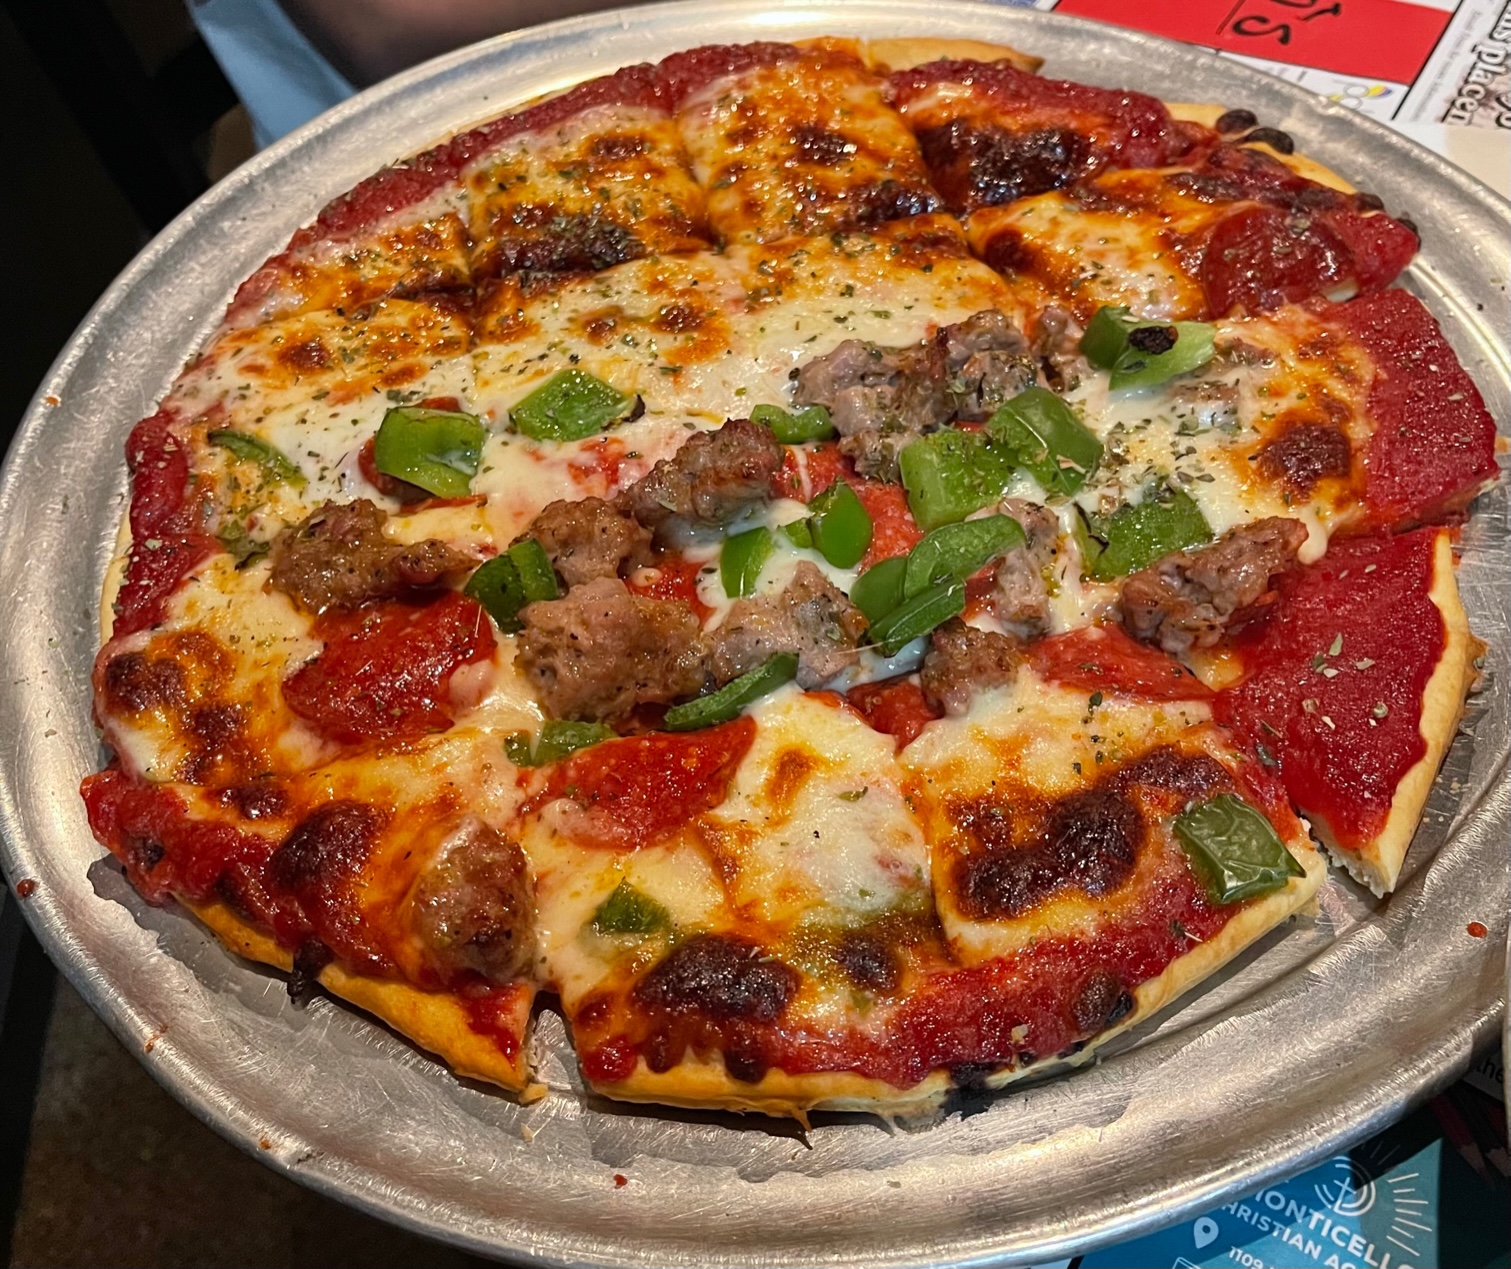 There is a full pizza pie on a metal pan for dine in at Filippo's. Photo by Stephanie Wheatley.